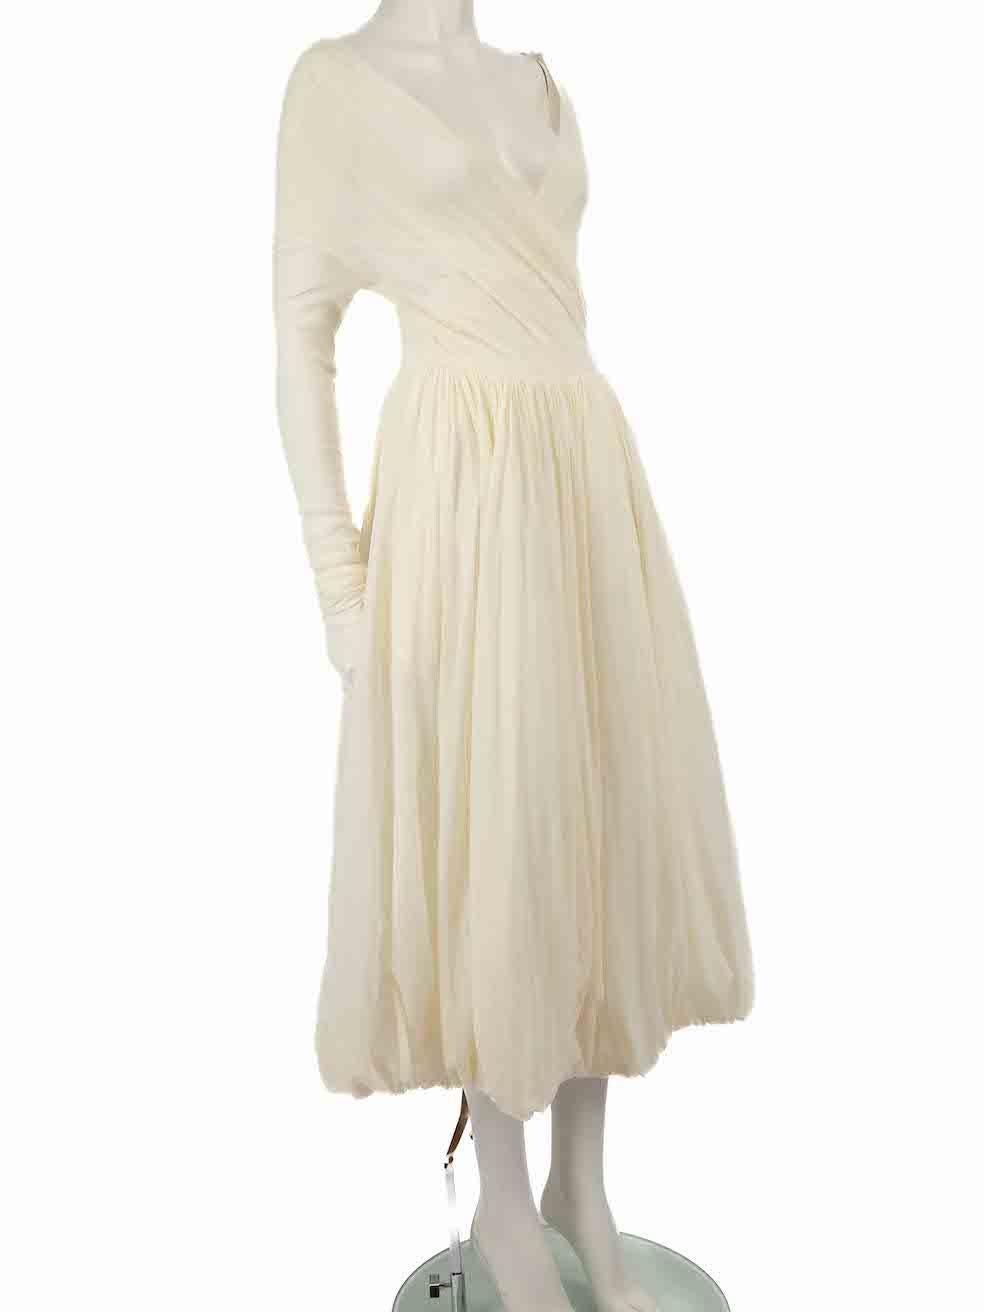 CONDITION is Very good. Minimal wear to dress is evident. Minimal wear to front waist and wrap edge with small marks to the fabric on this used Philosophy di Lorenzo Serafini designer resale item.
 
 
 
 Details
 
 
 Ecru
 
 Polyamide
 
 Gown
 
